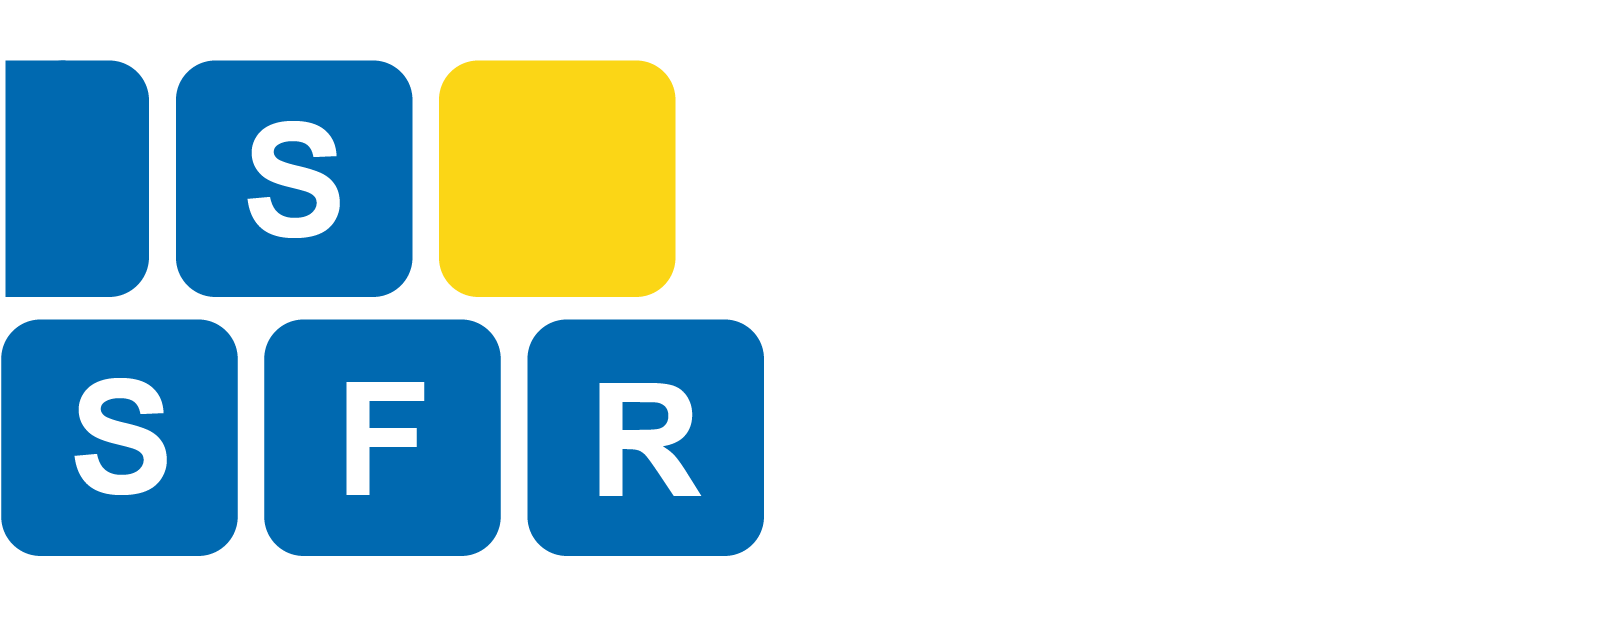 Council of Swedish Games Researchers (SSFR)